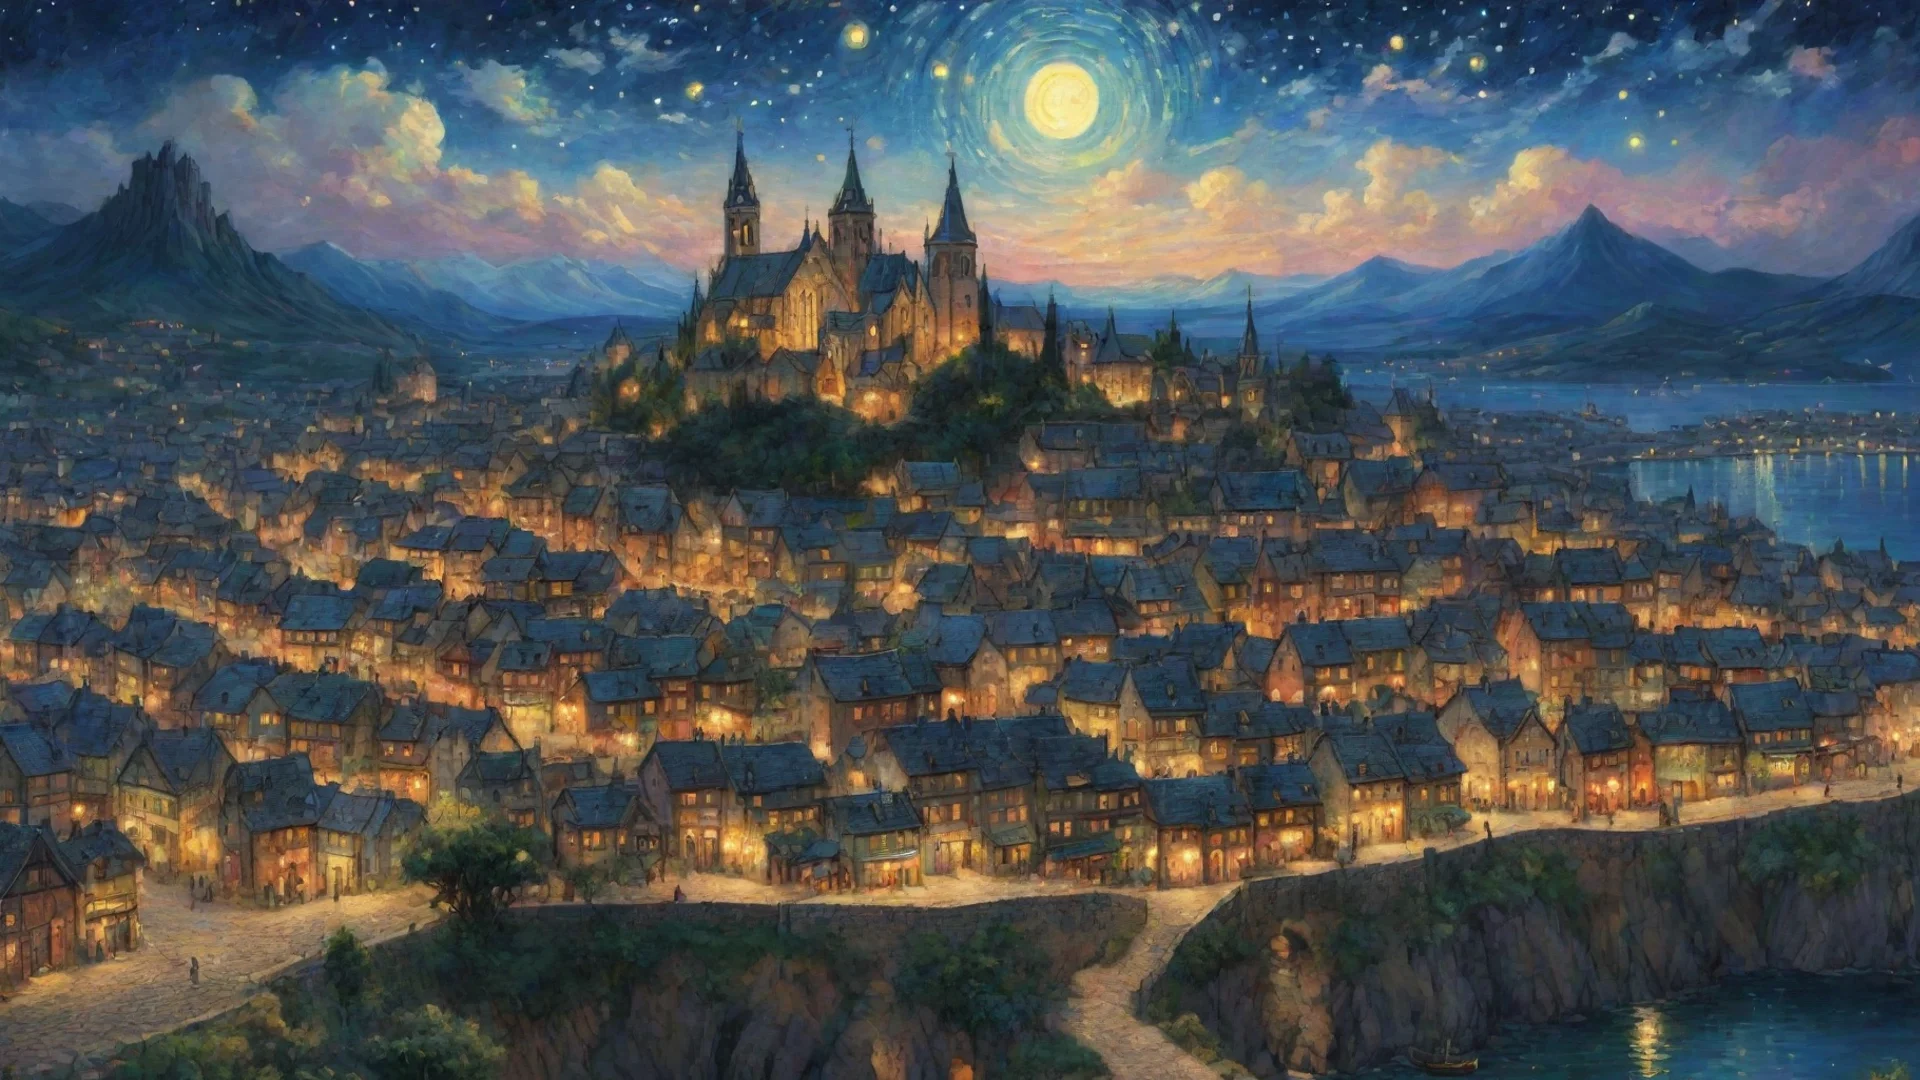 amazing heavenly epic town lit up at night sky epic lovely artistic ghibli van gogh happyness bliss peace  detailed asthetic hd wow awesome portrait 2 wide